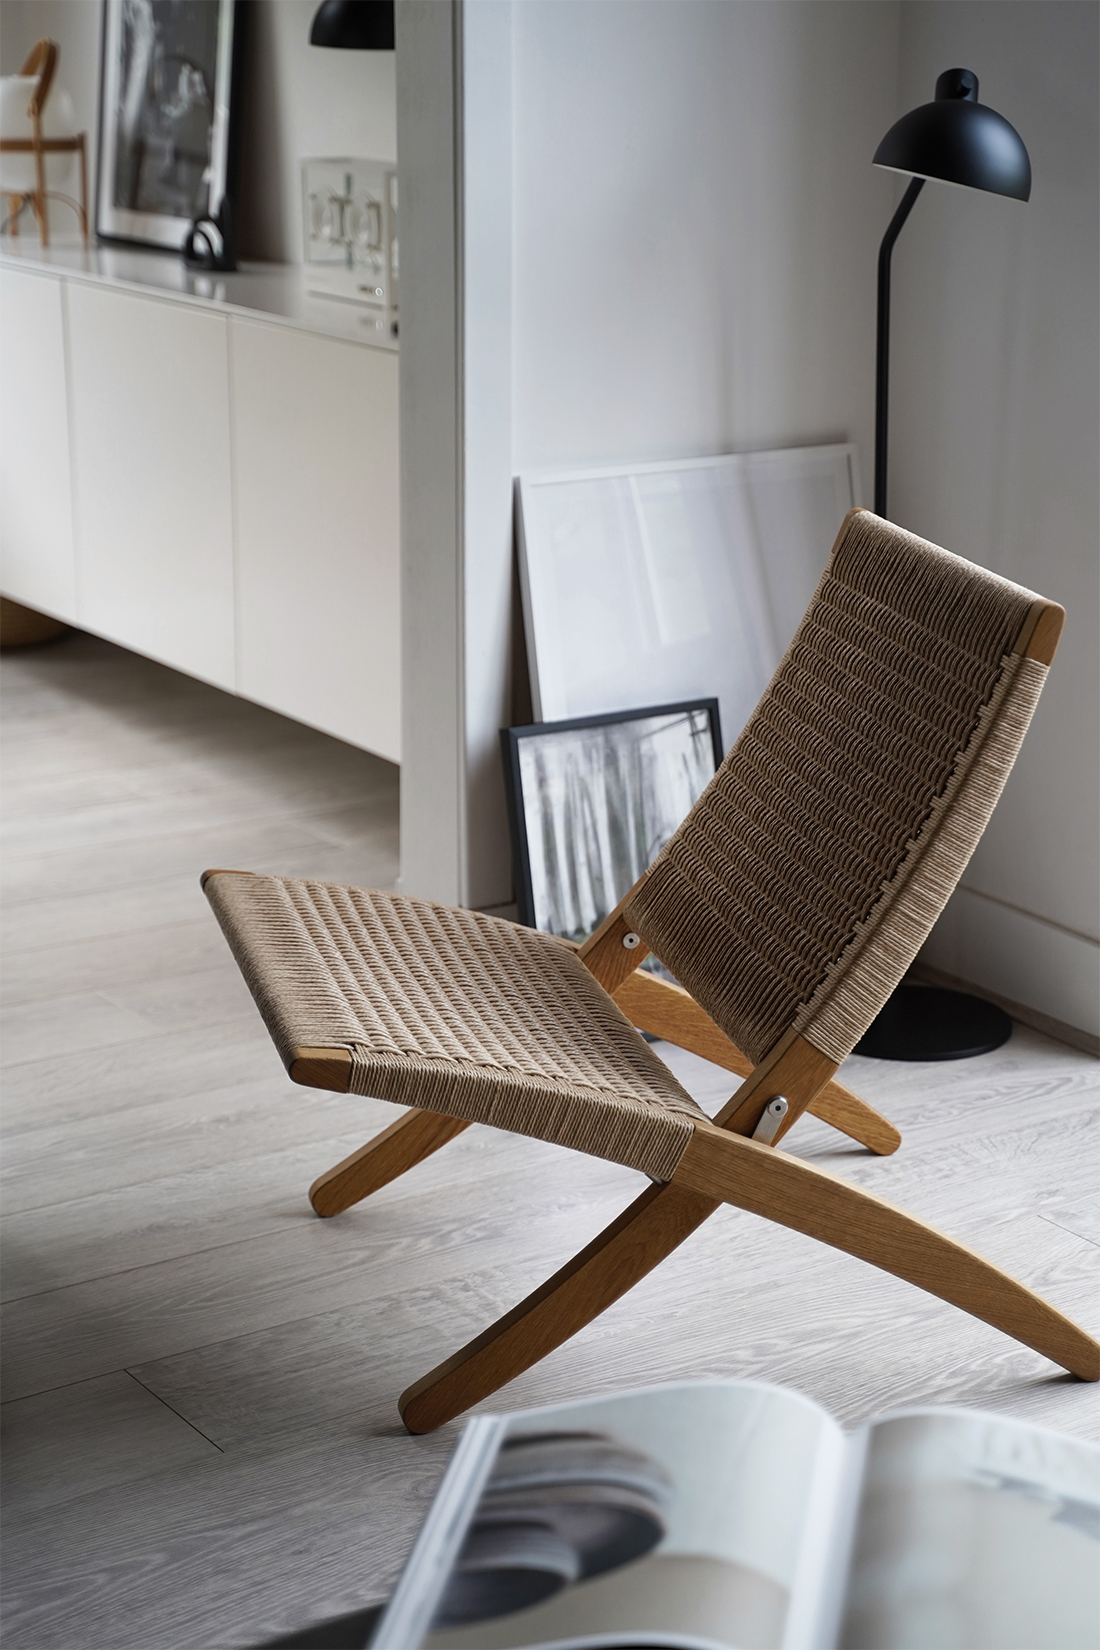 Woven Cuba Chair in a minimal Nordic living room